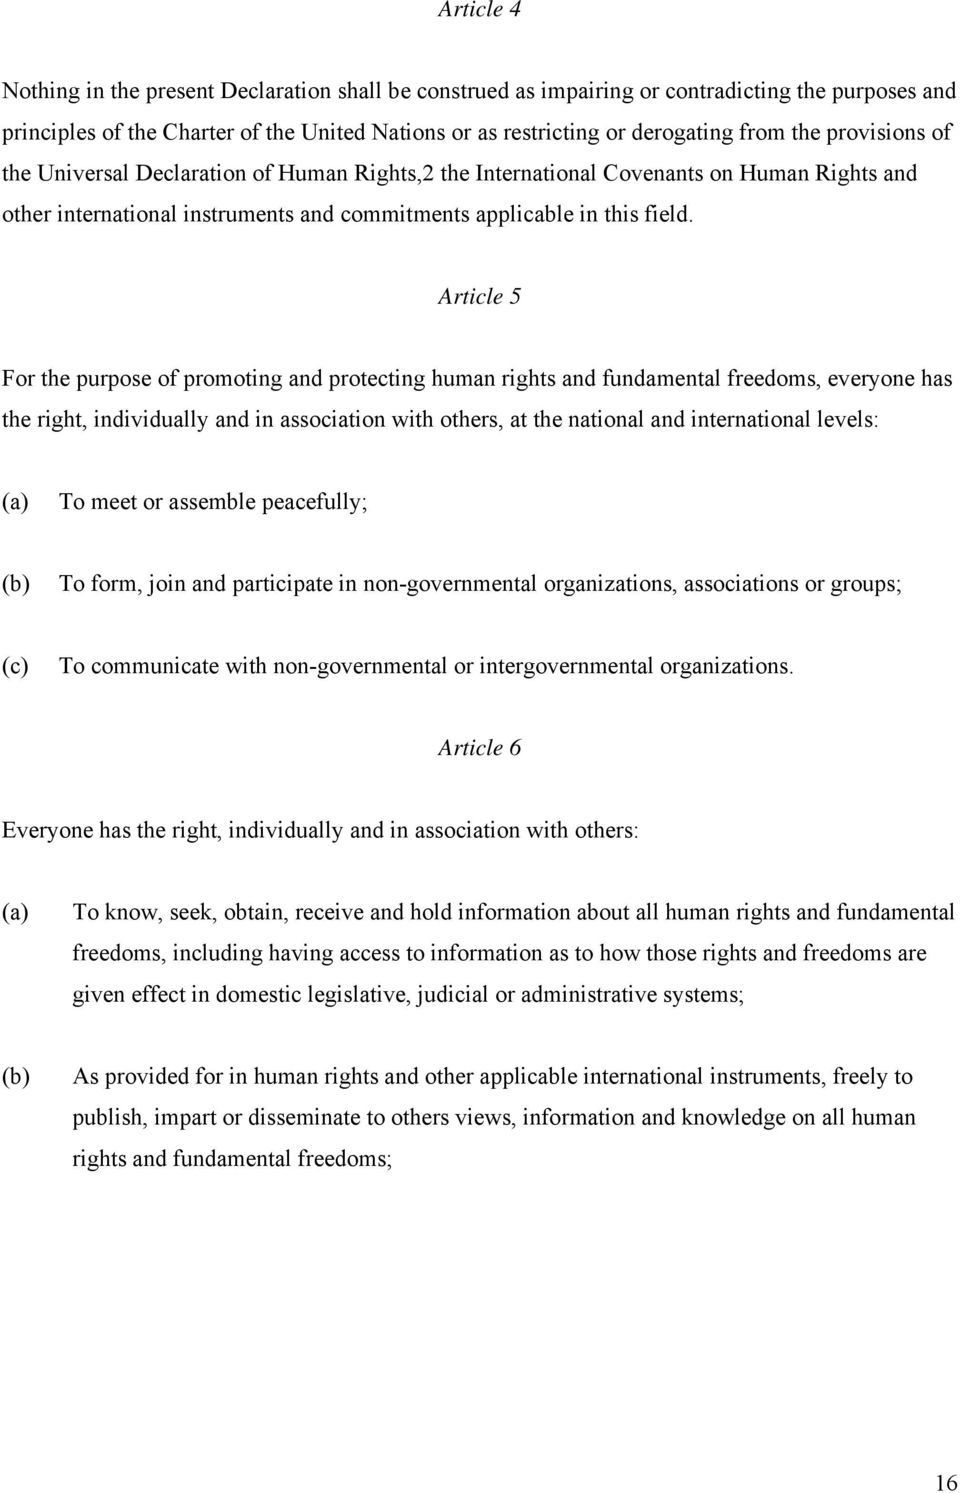 Article 5 For the purpose of promoting and protecting human rights and fundamental freedoms, everyone has the right, individually and in association with others, at the national and international